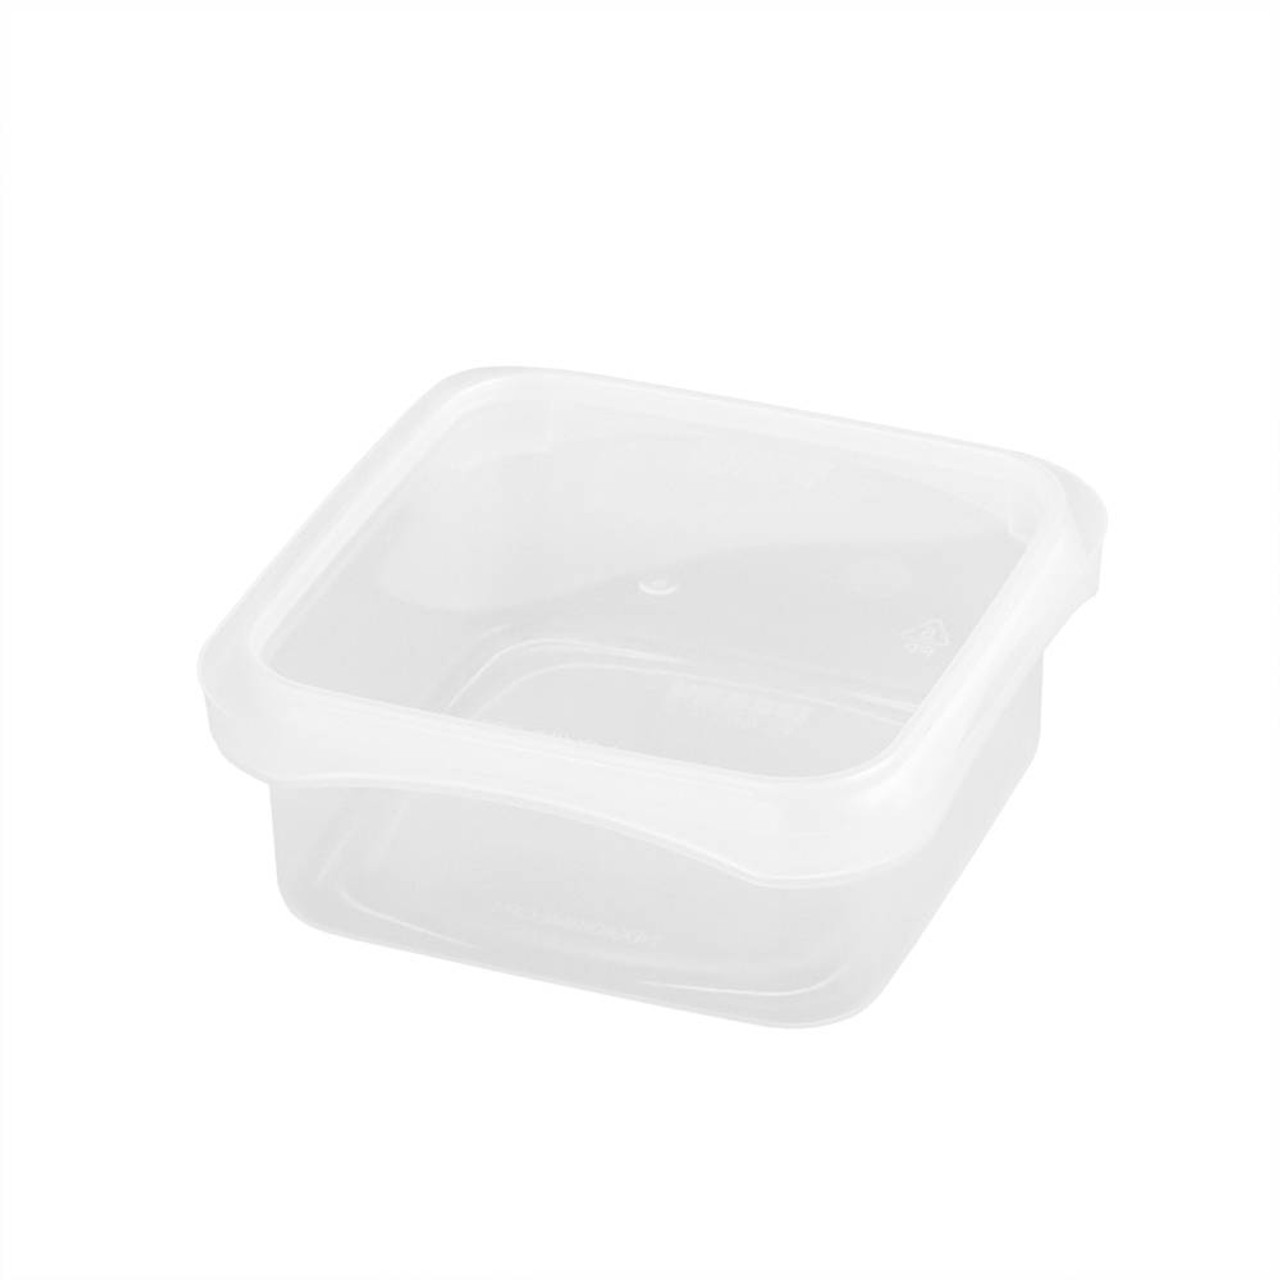 8 oz. BPA Free Food Grade SelecTE (Tamper Evident) Square Container with  Lid (T4X408IMLCP & L4X4IMLCP) - starting quantity 25 count - FREE SHIPPING  - ePackageSupply